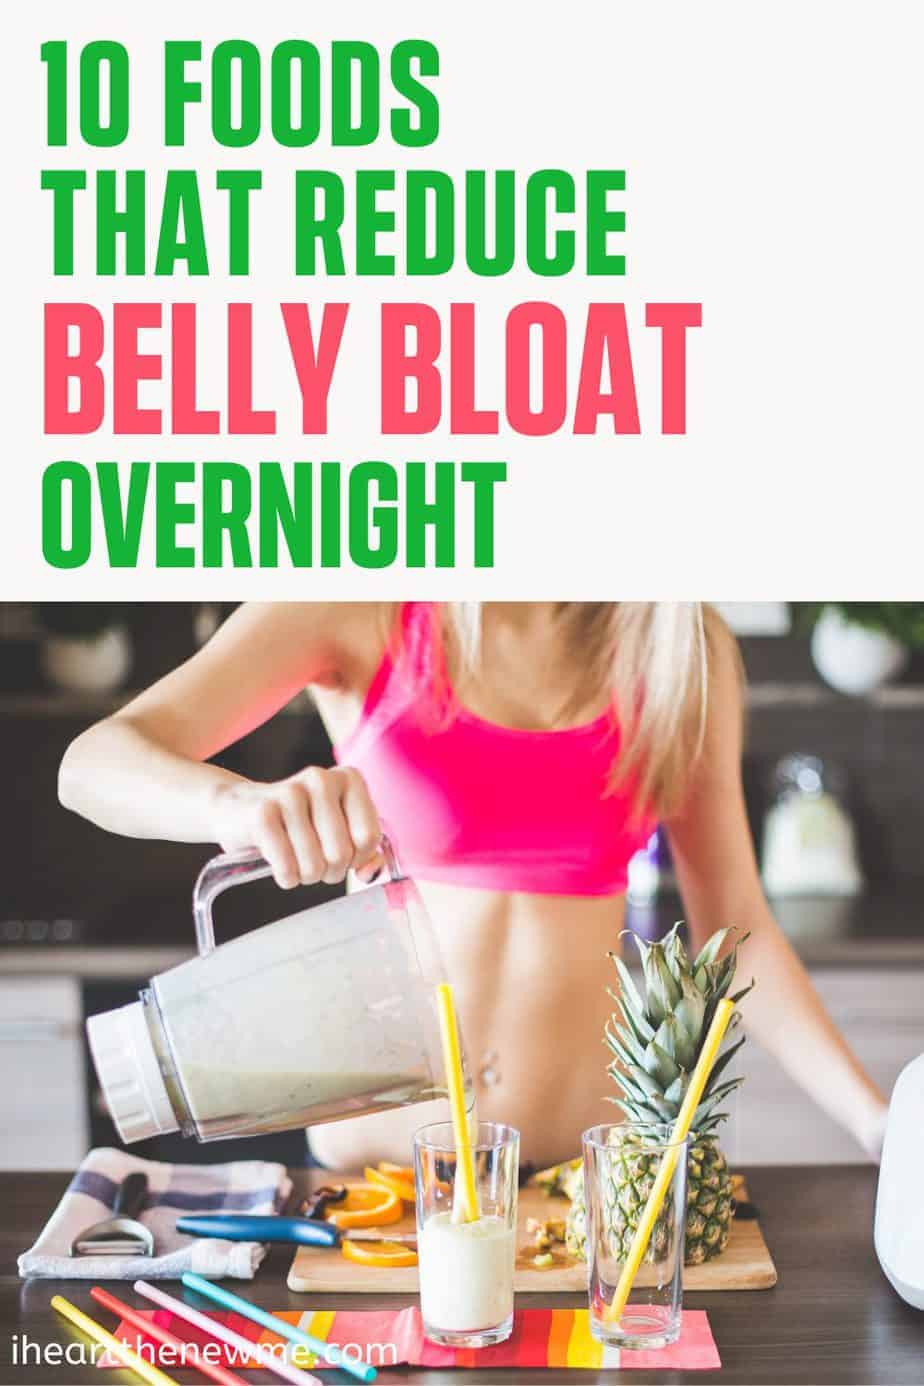 10 Foods To Reduce Belly Bloat (Any of them will work)